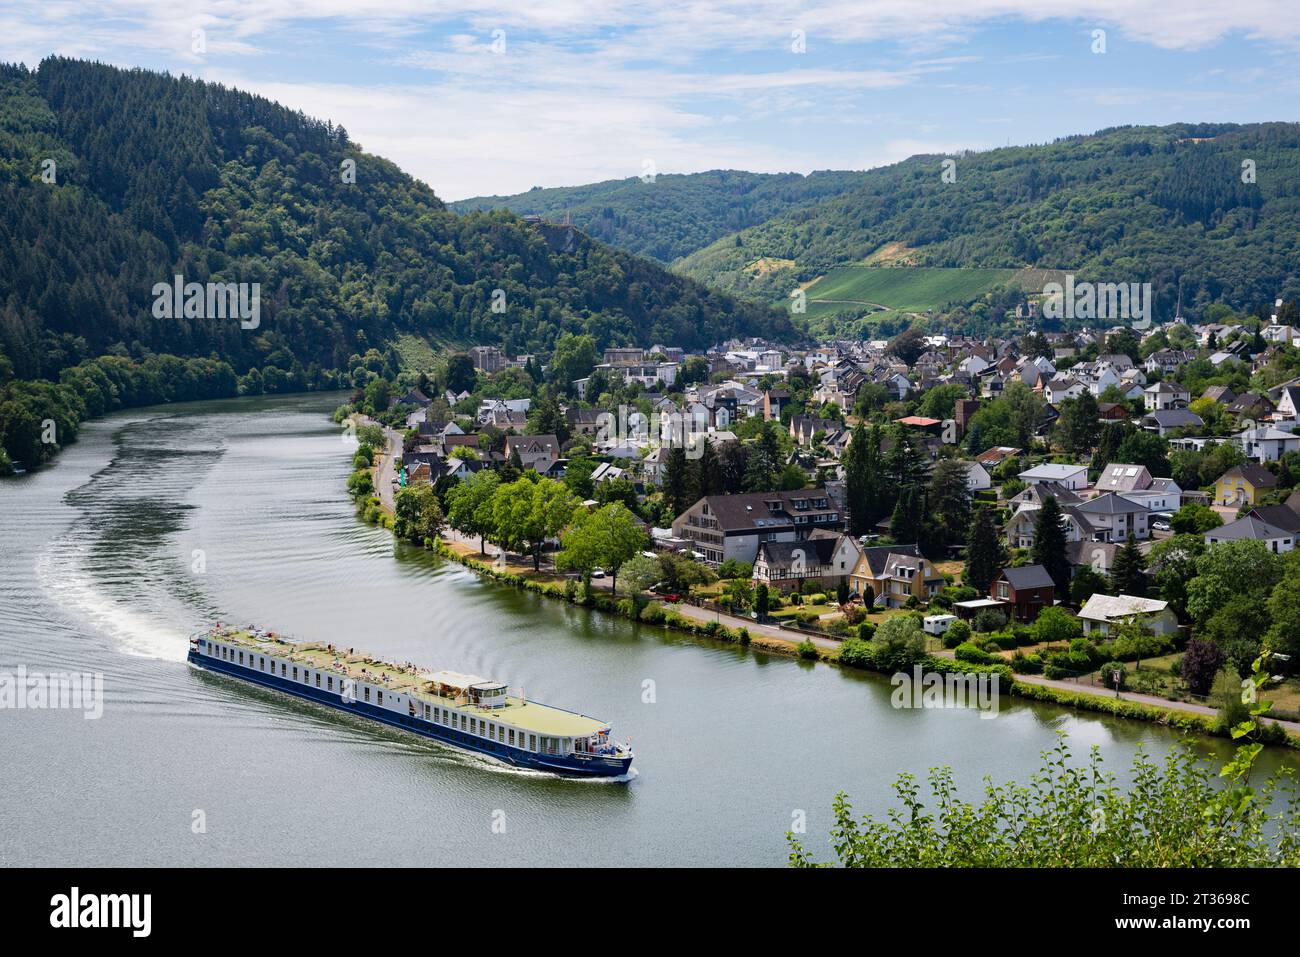 Germany, Rhineland-Palatinate, Traben-Trarbach, Ferry leaving riverside town in Mosel Valley Stock Photo